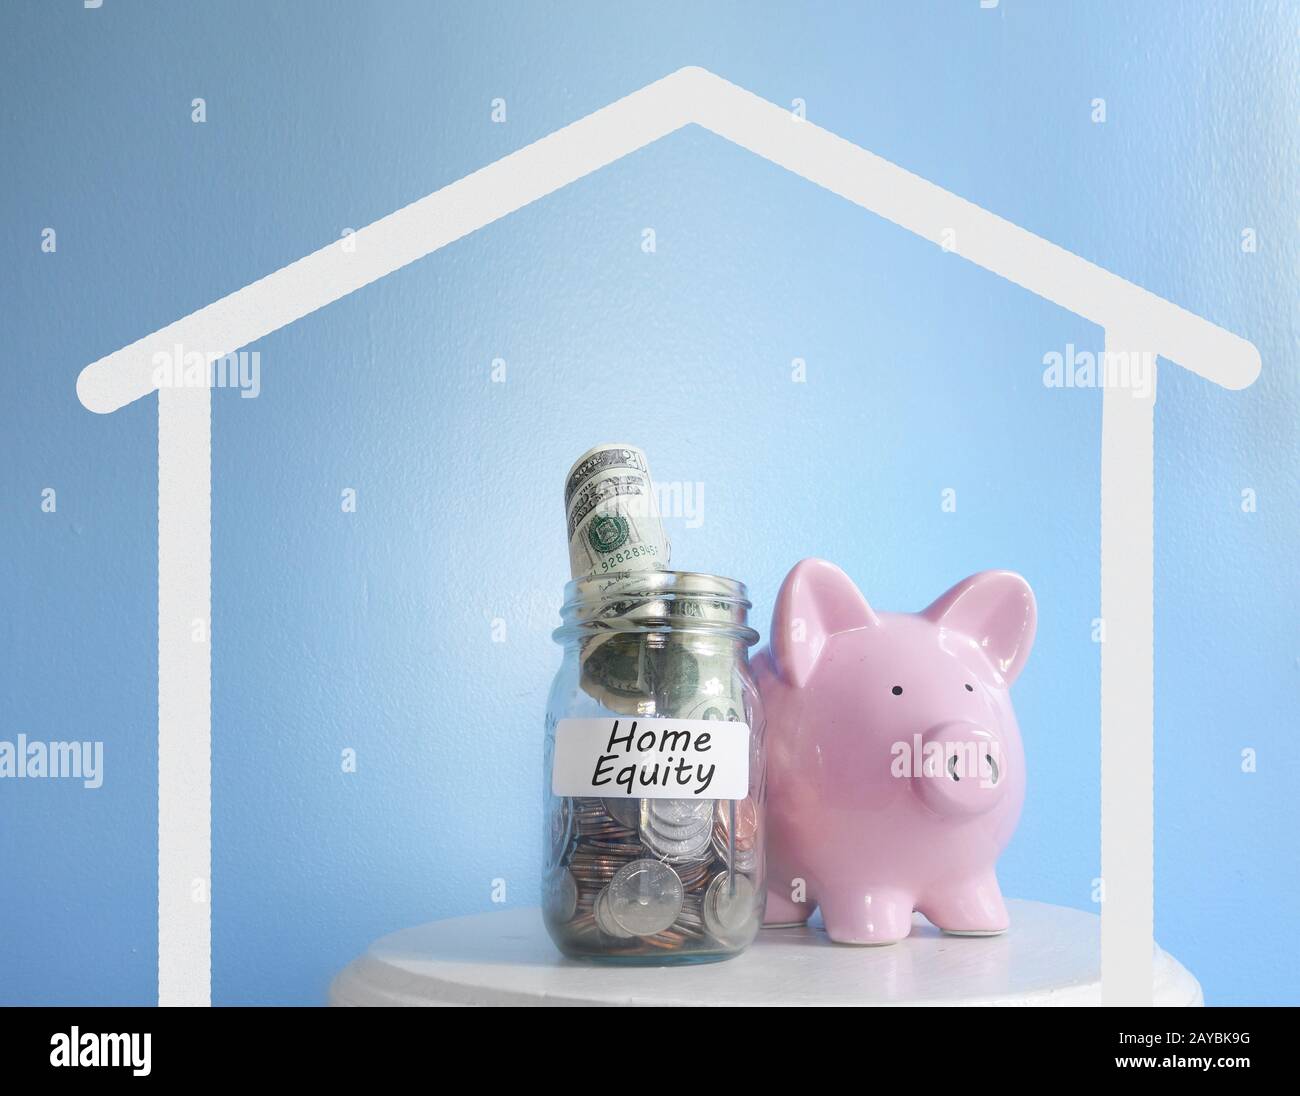 Piggy bank coin jar Home Equity Stock Photo